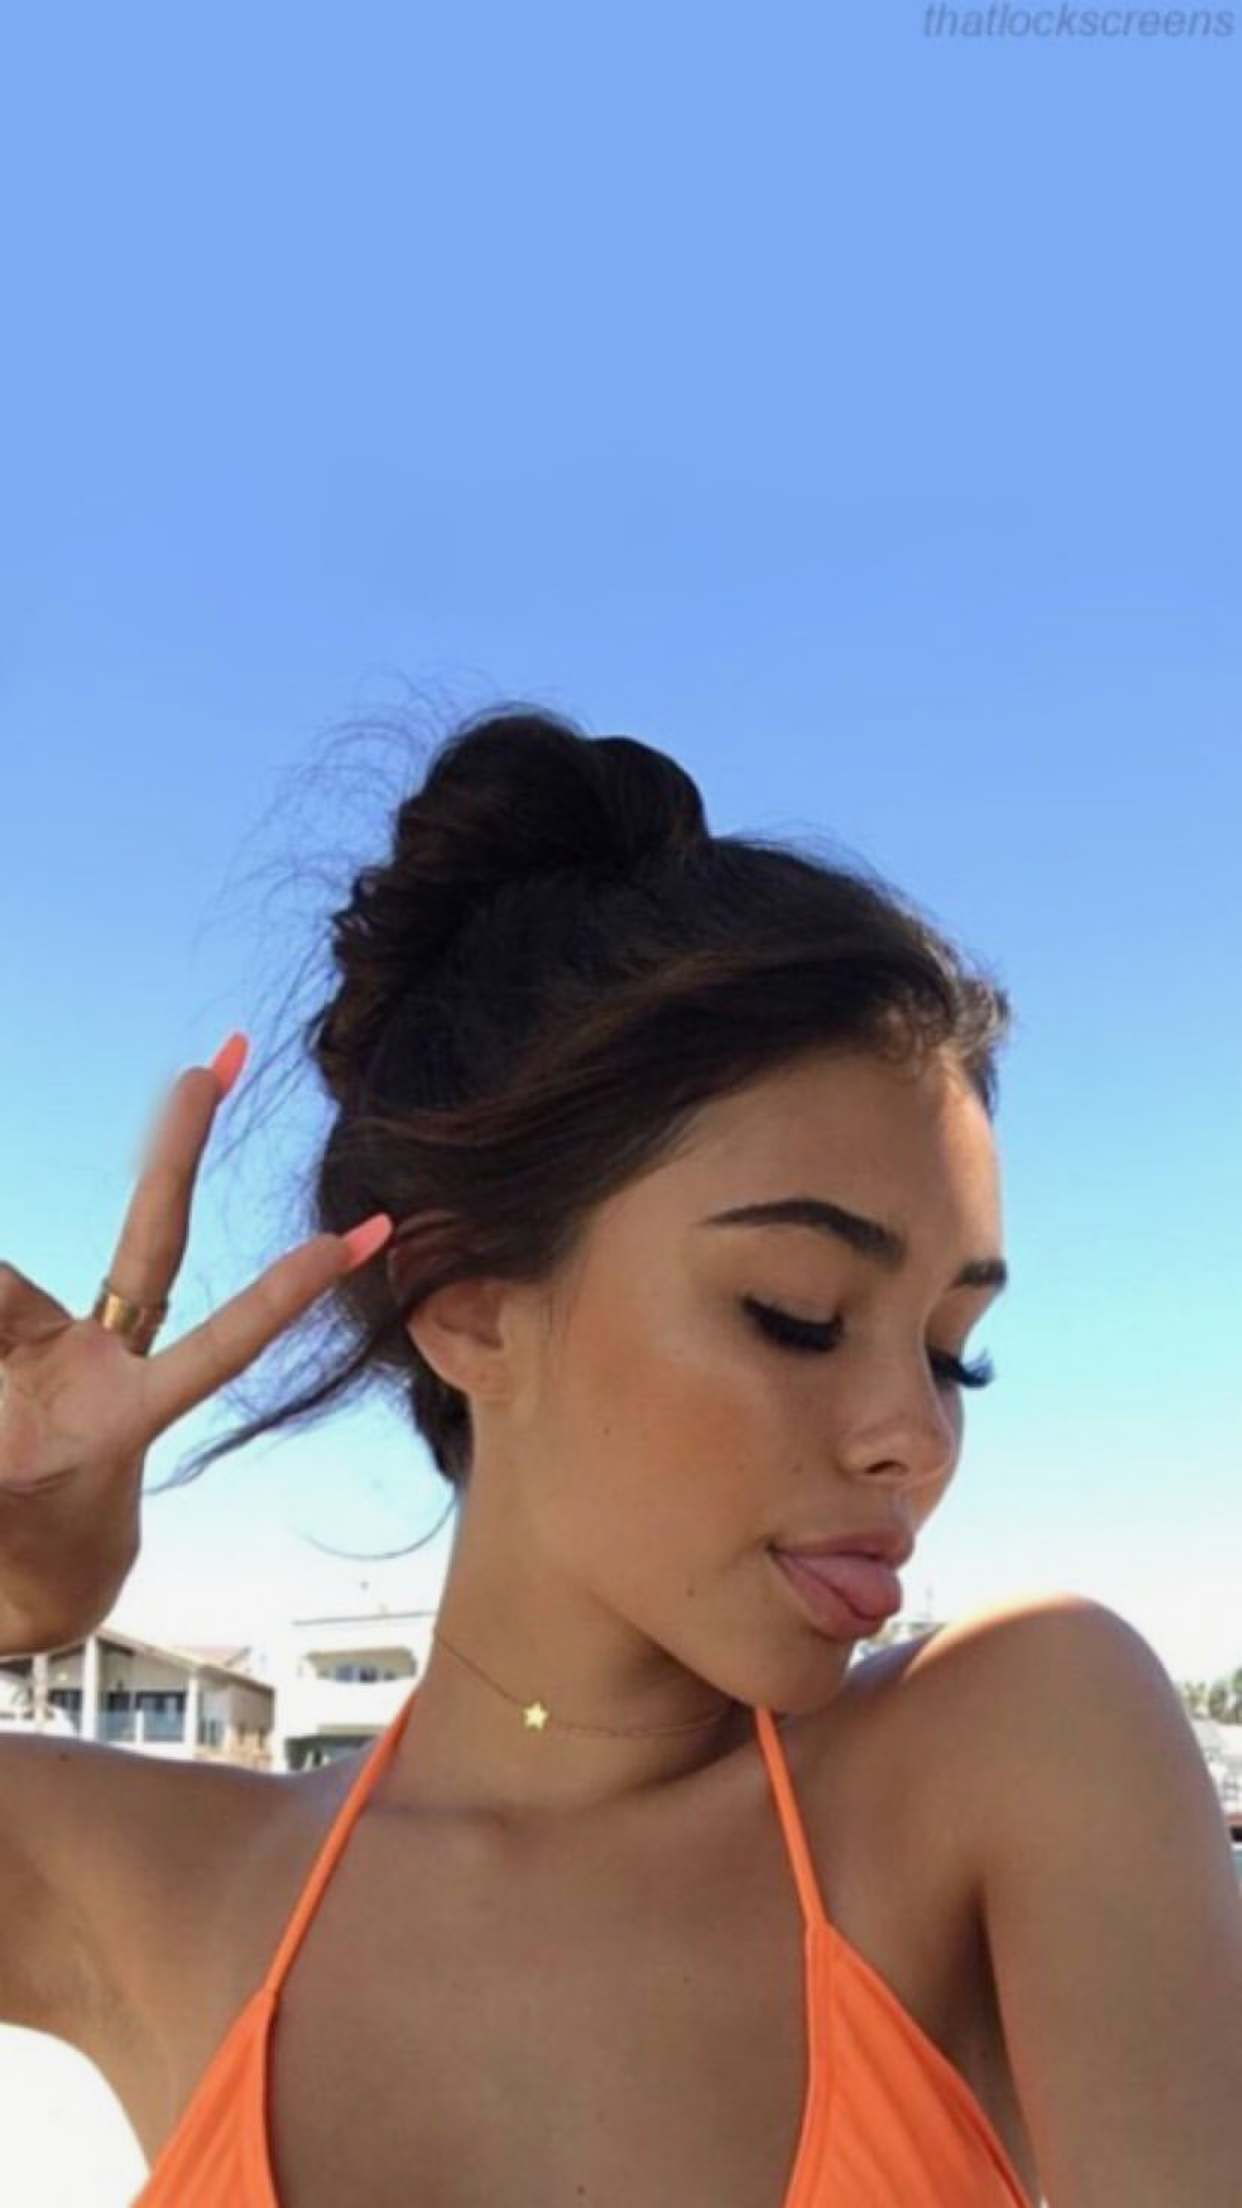 Madison Beer 2019 Wallpapers